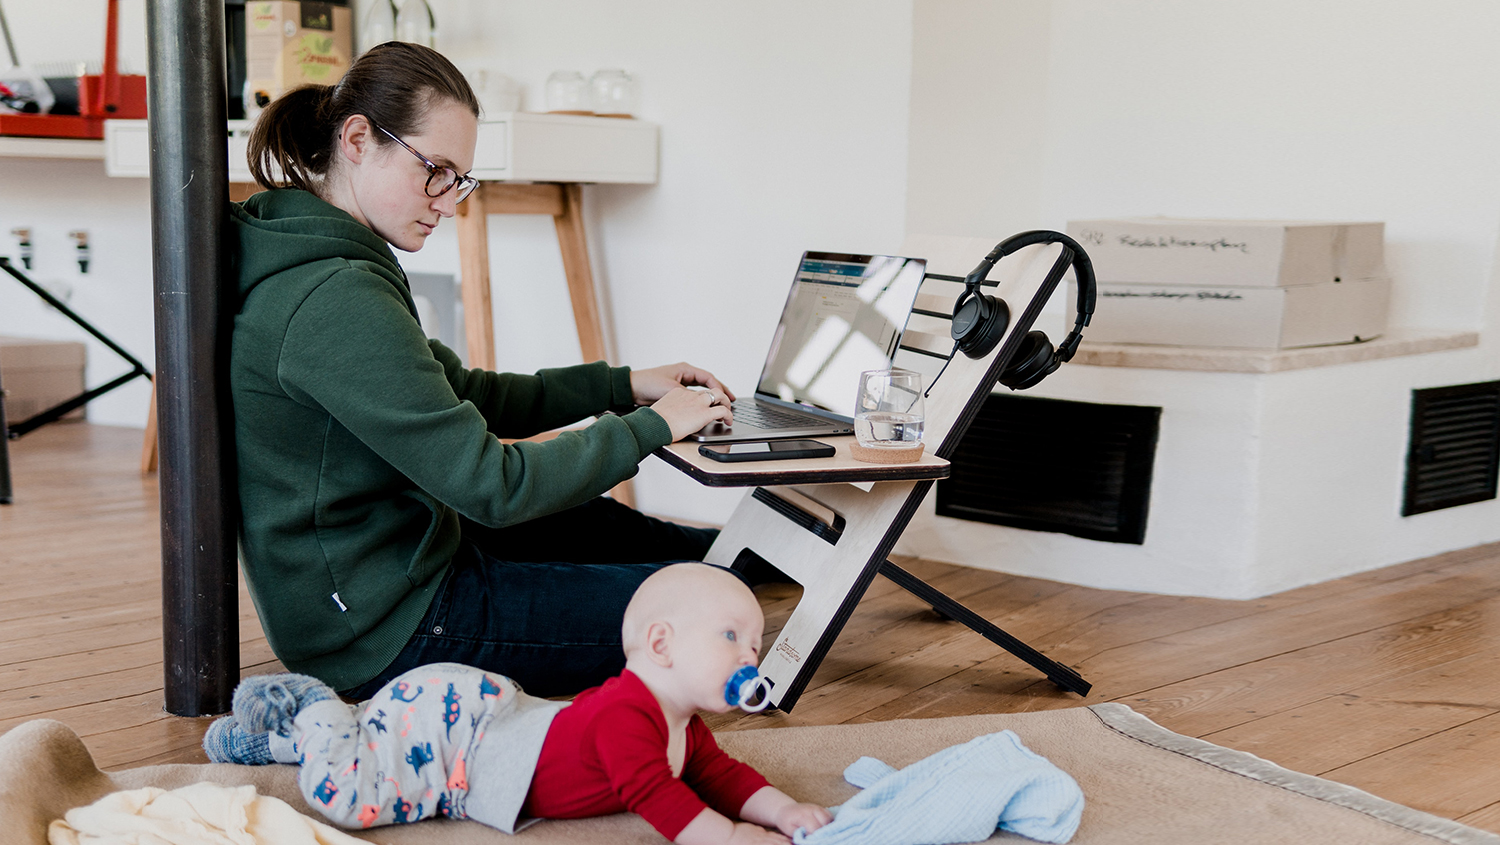 Homeoffice Women working on Laptop and Child